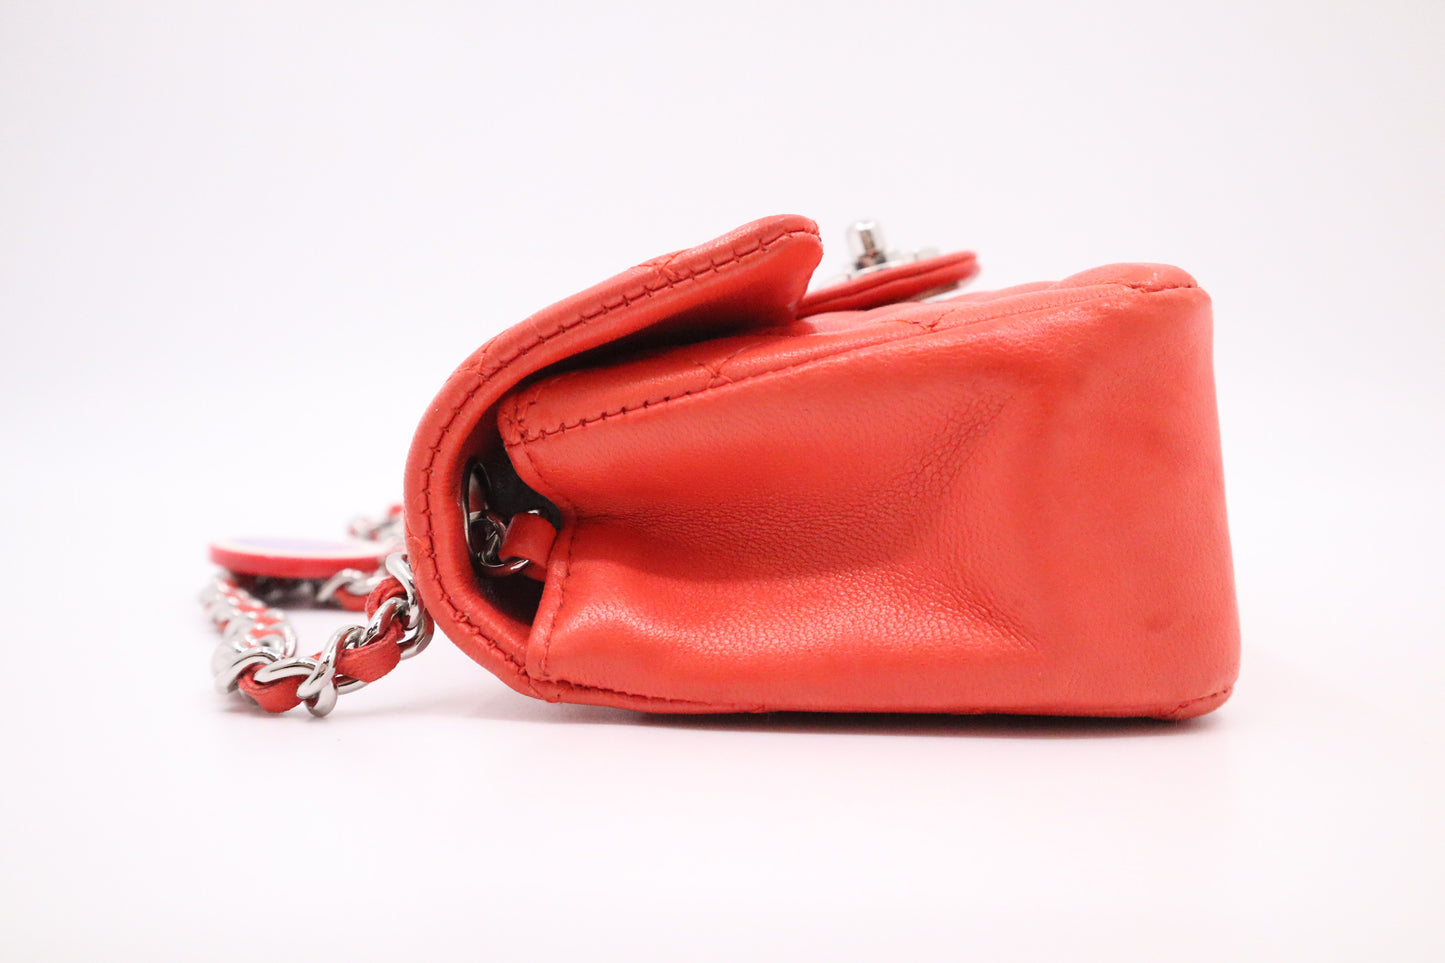 Chanel Ladybug Mini Flap in Coral Leather